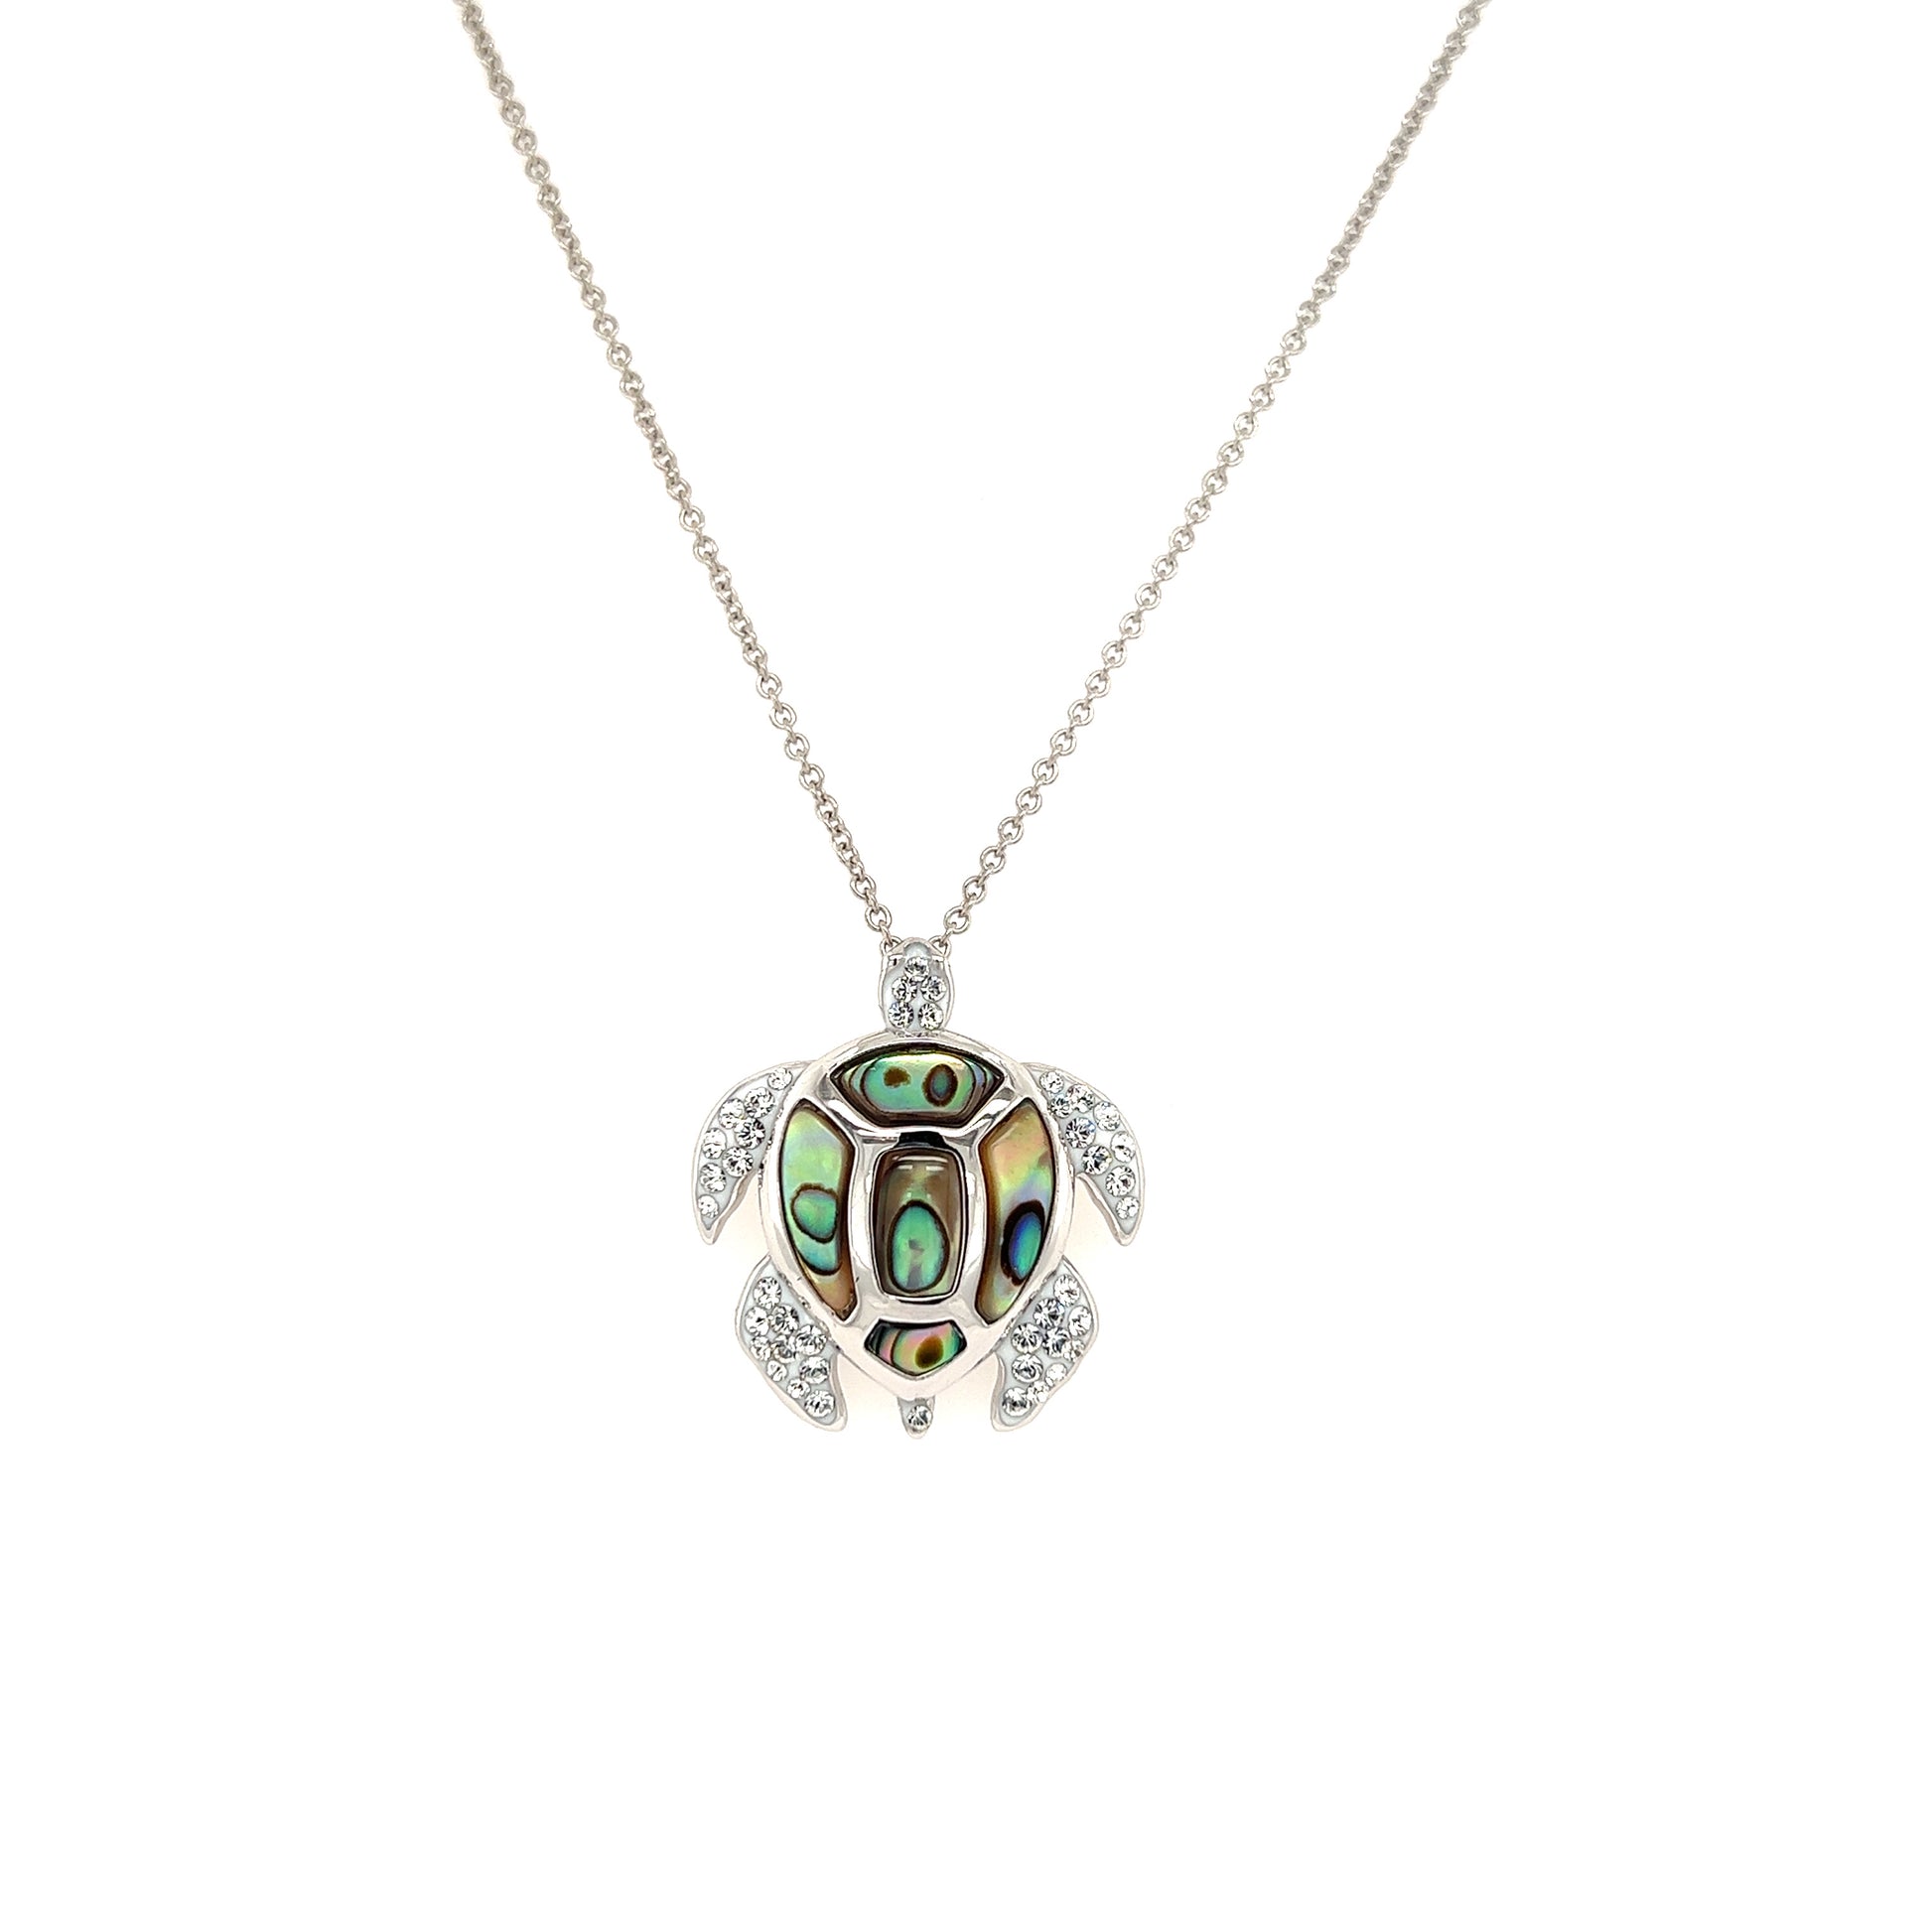 Sea Turtle Necklace with Abalone Shell Accents and White Crystals in Sterling Silver Necklace Front View